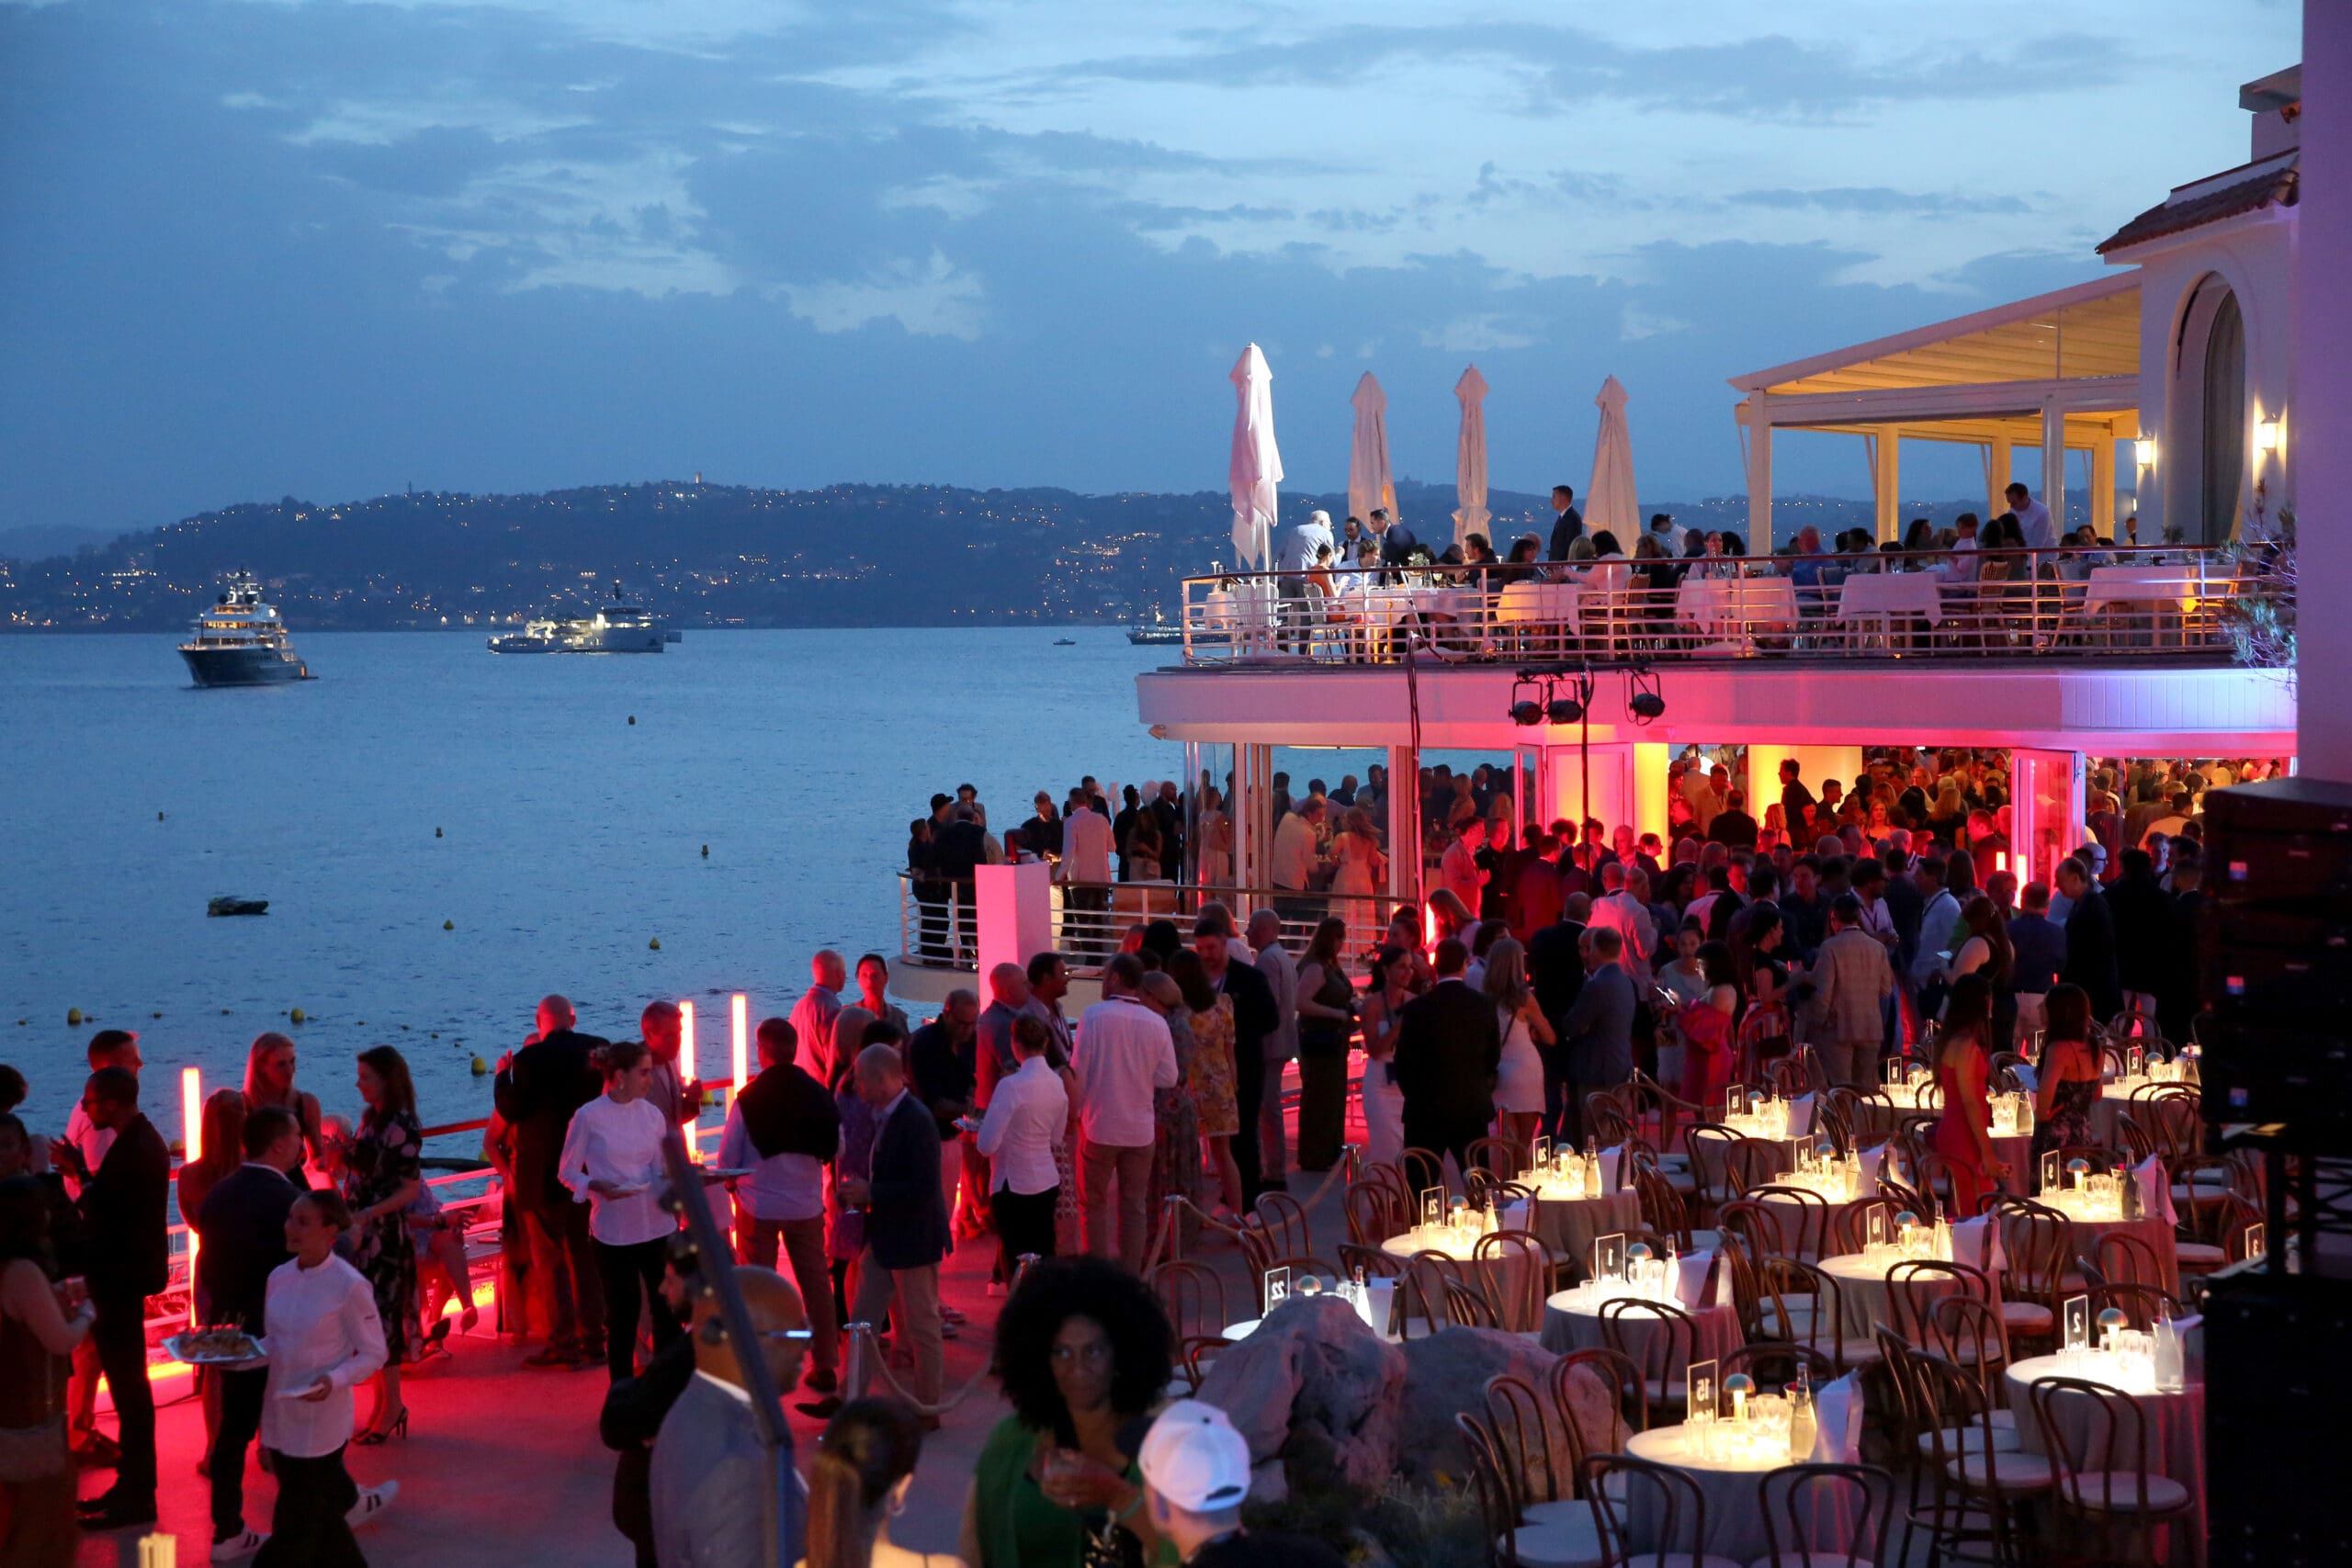 CAP D’ANTIBES, FRANCE – JUNE 20: A view of atmosphere is seen as Lizzo performs during a VIP dinner party hosted by iHeartMedia and MediaLink at Hotel du Cap-Eden-Roc during the Cannes Lions Festival on June 20, 2023 in Cap d’Antibes, France. (Photo by Adam Berry/Getty Images for iHeartMedia)